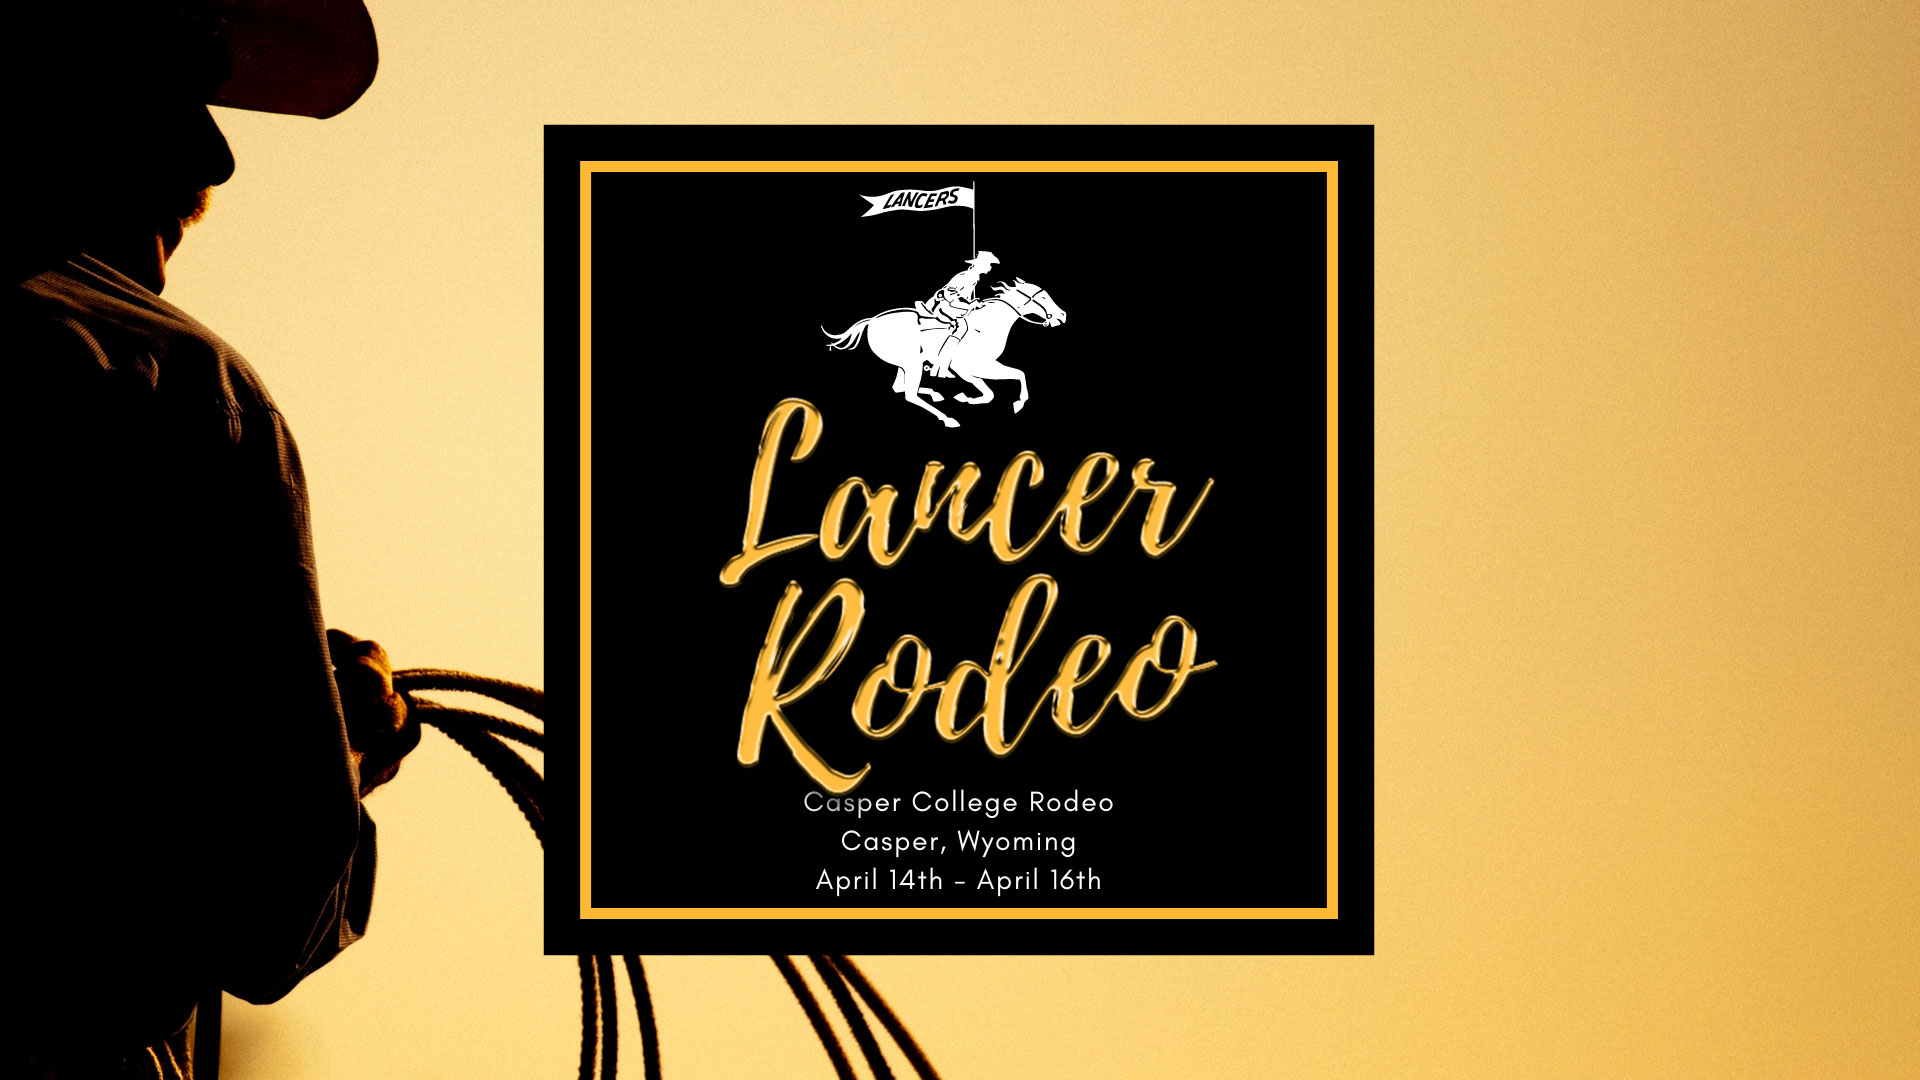 Eastern Wyoming College - Lancer Rodeo - Casper Rodeo Results